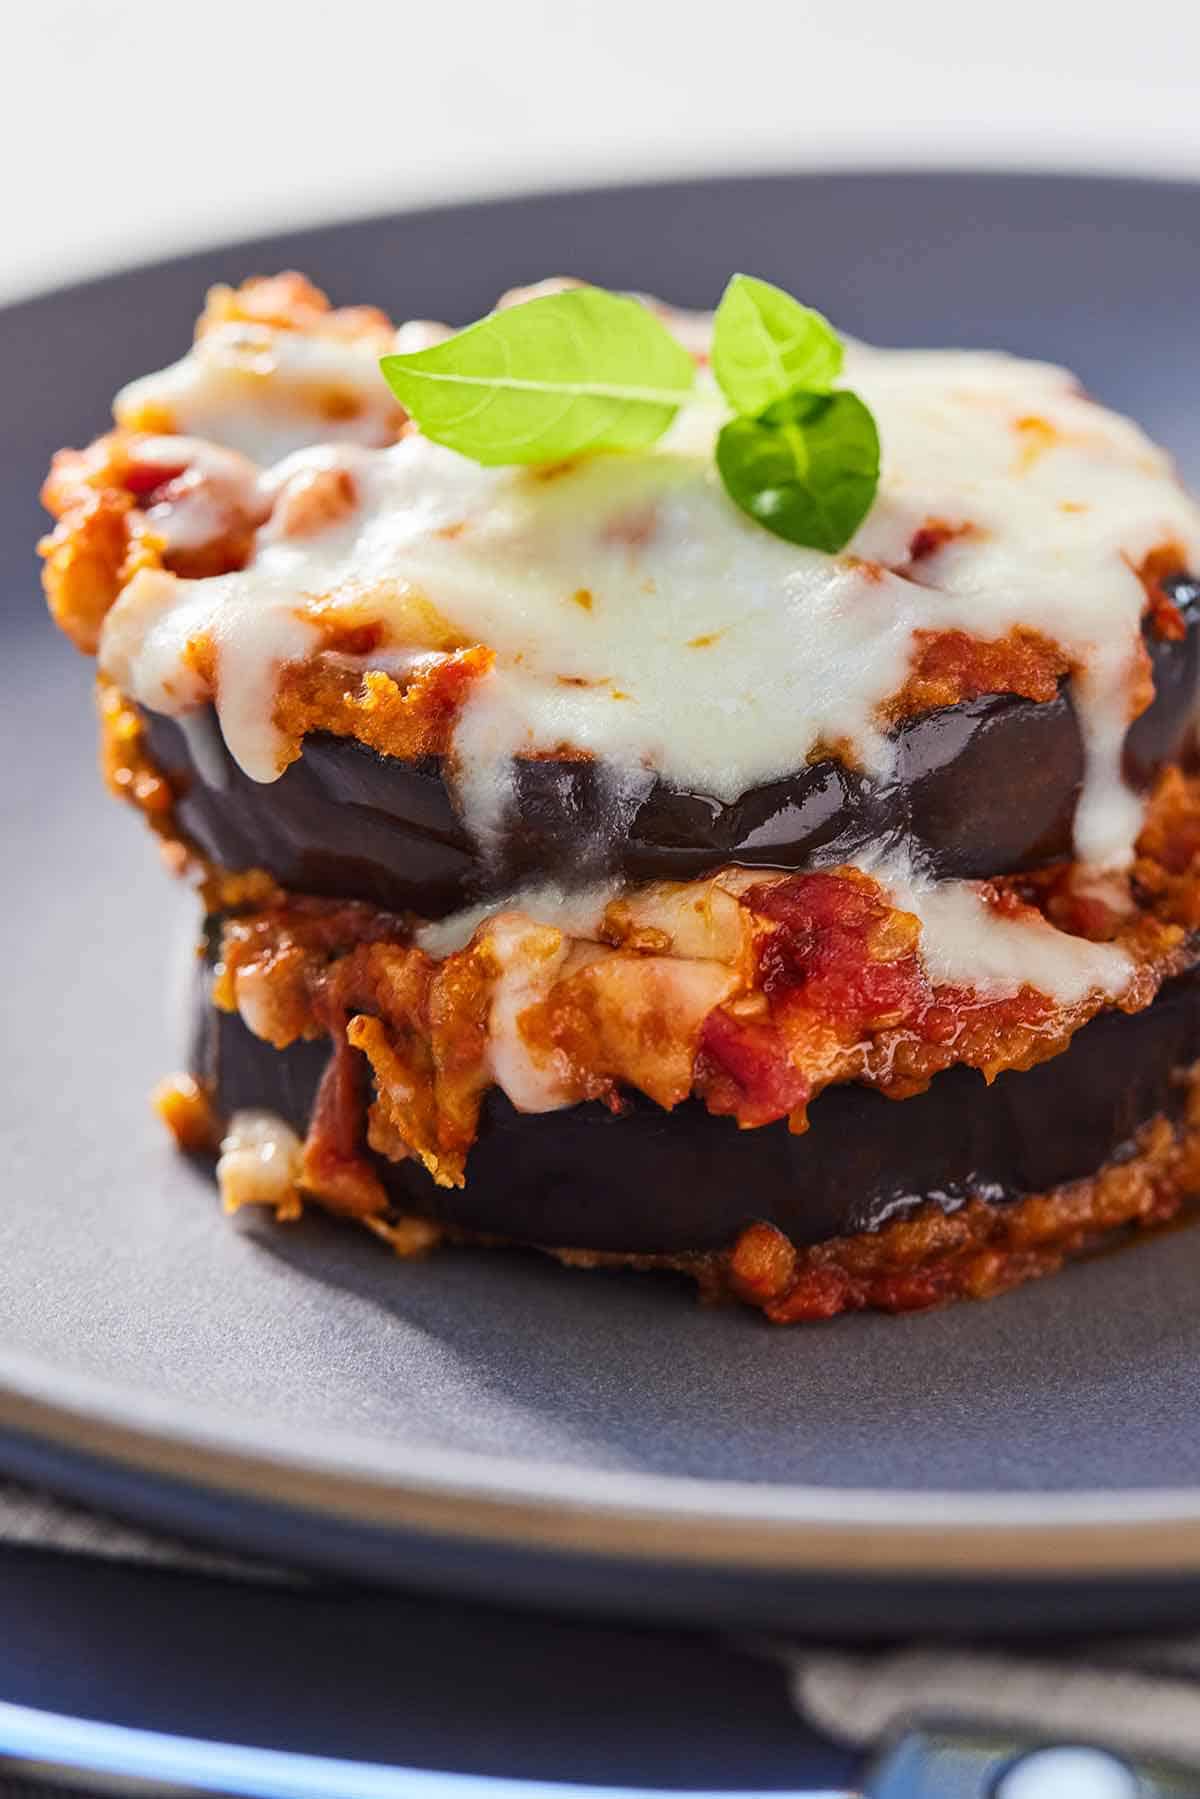 A plate with a serving of eggplant parmesan topped with basil.